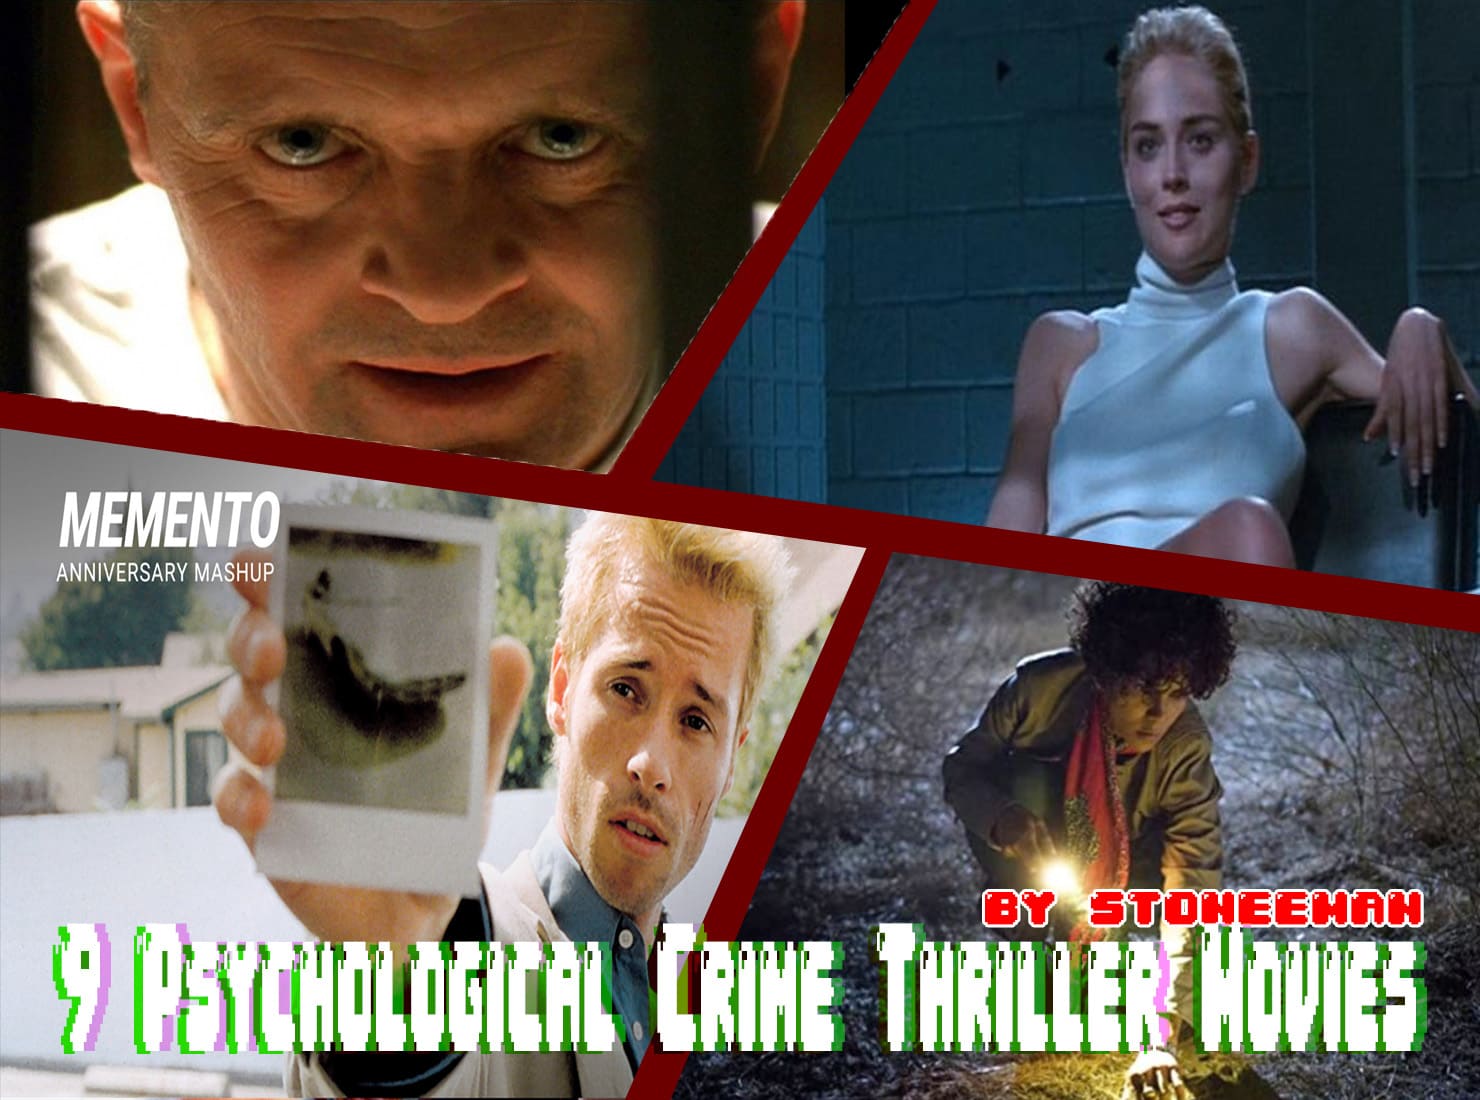 9 Psychological Crime Thriller Movies with Good Storytelling